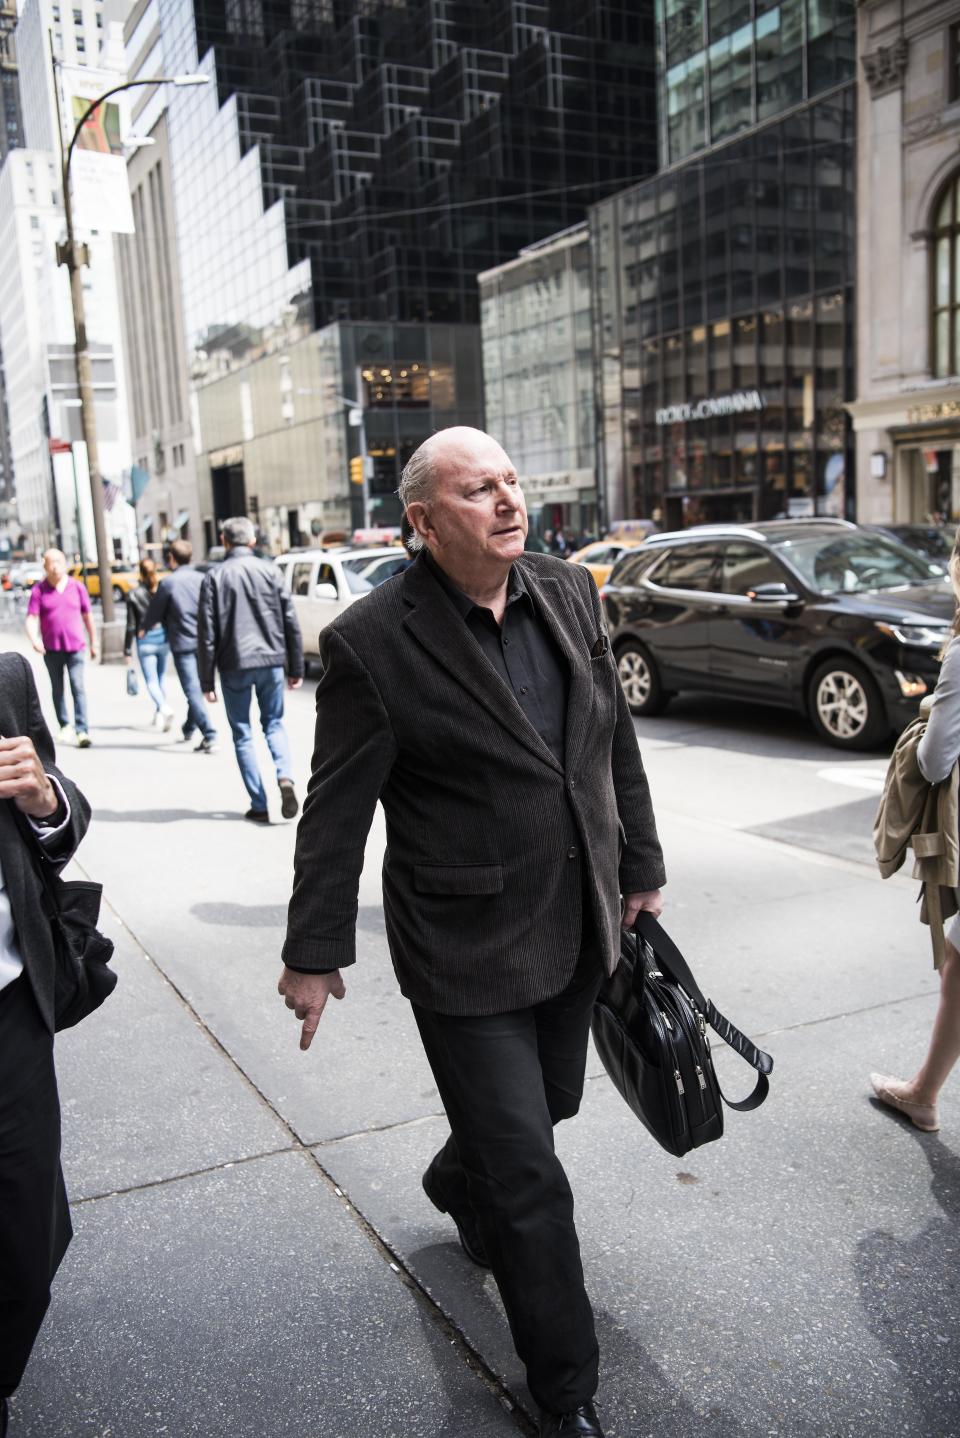 Jerome Rose walks&nbsp;along Fifth Avenue in Manhattan. He has moved to a ground-floor apartment after a fire in his previous building killed four people in 1998. (Photo: Damon Dahlen/HuffPost)